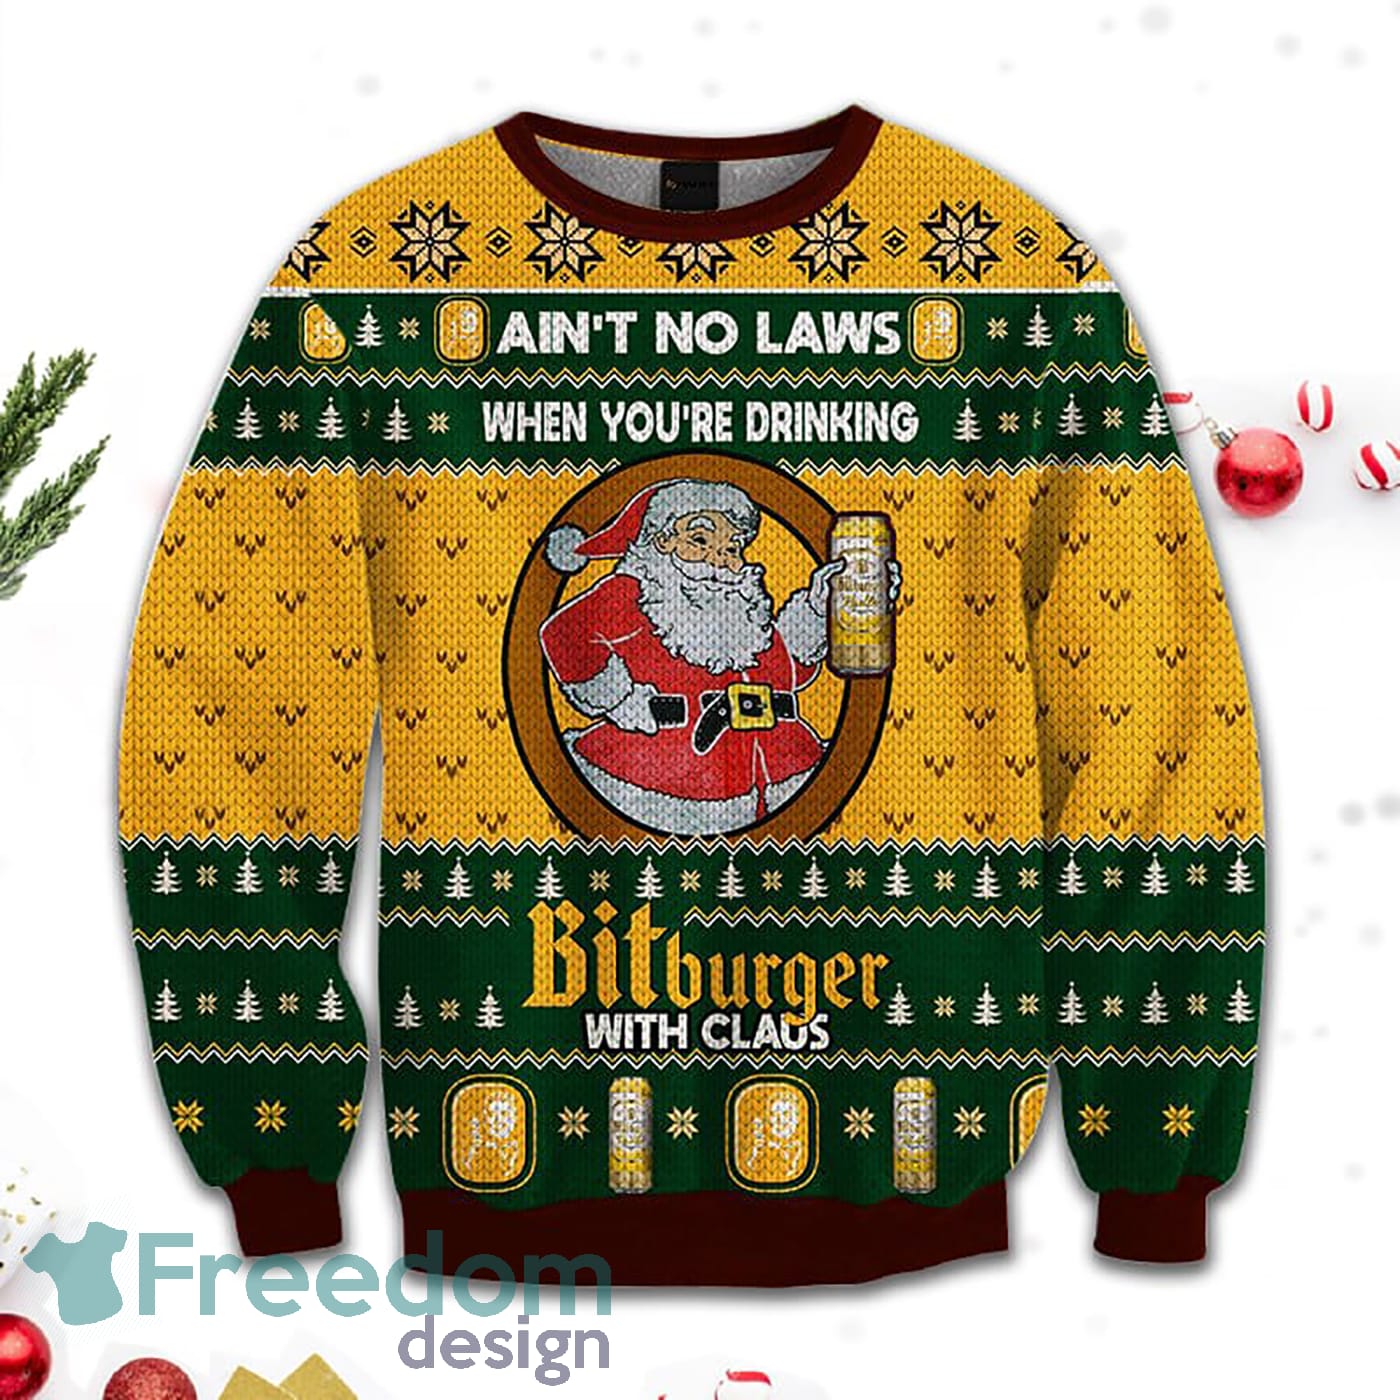 Merr Christmas Ain't No Laws When You Drink Bitburger With Claus Sweatshirt